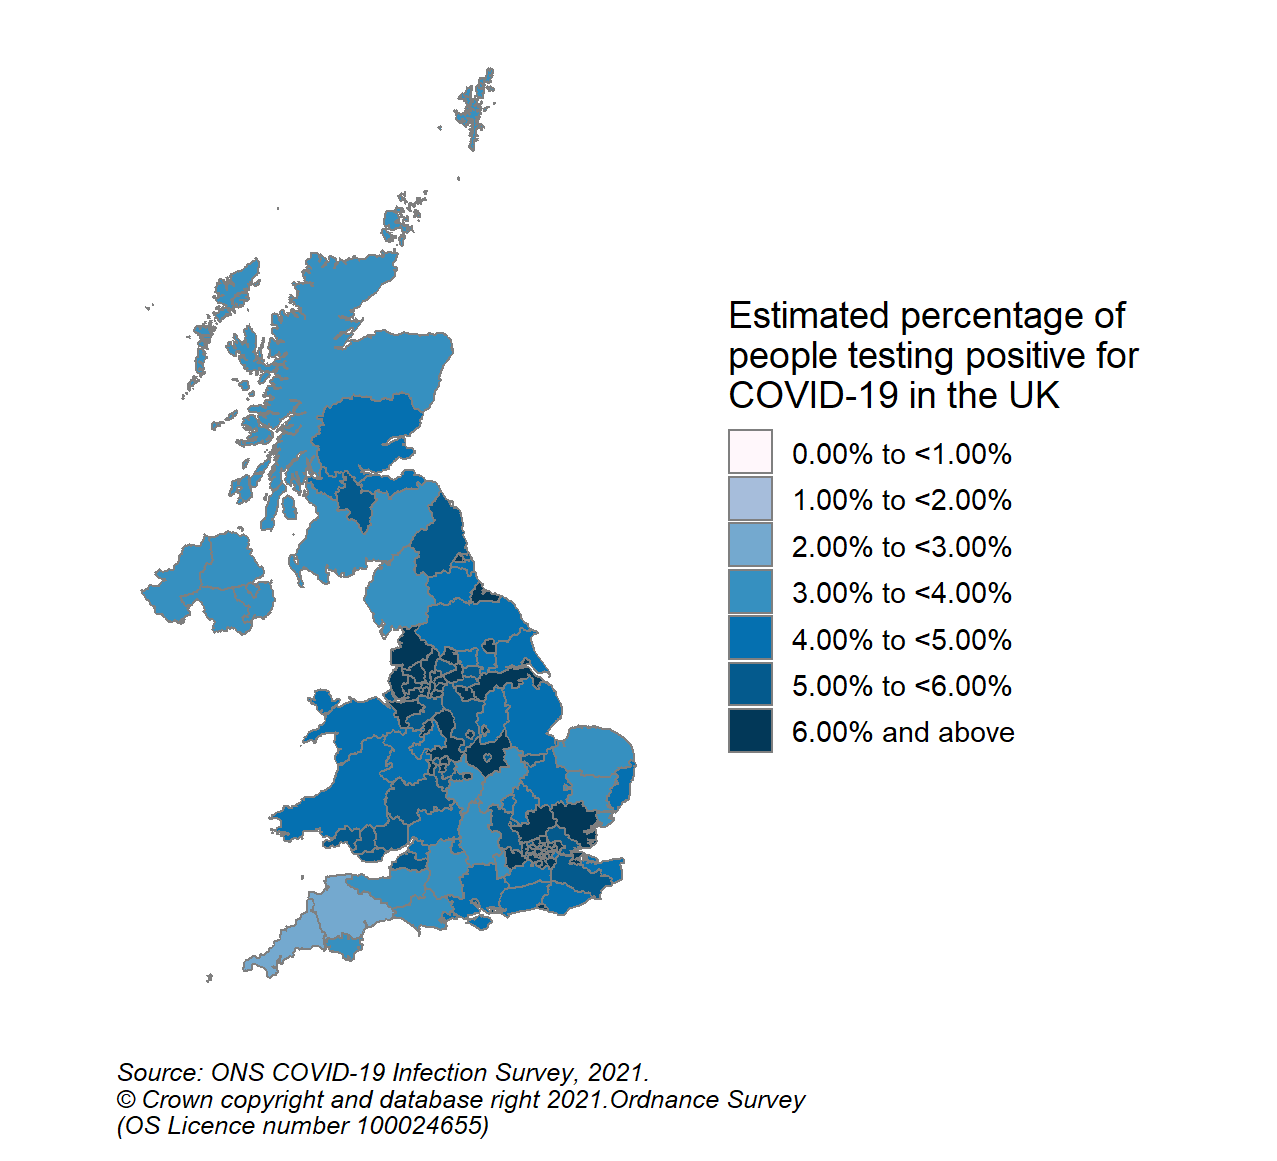 This colour coded map of the UK shows the modelled estimates of the percentage of the private residential population testing positive for COVID-19, by COVID-19 Infection Survey sub-regions. In Scotland, these sub-regions are comprised of Health Boards. The regions are: 123 - NHS Grampian, NHS Highland, NHS Orkney, NHS Shetland and NHS Western Isles, 124 - NHS Fife, NHS Forth Valley and NHS Tayside, 125 - NHS Greater Glasgow & Clyde, 126 - NHS Lothian, 127 - NHS Lanarkshire, 128 - NHS Ayrshire & Arran, NHS Borders and NHS Dumfries & Galloway.  The sub-region with the highest modelled estimate for the percentage of people testing positive in Scotland was CIS Region 127 (NHS Lanarkshire) at 5.28% (95% credible interval: 4.32% to 6.47%).  The sub-region with the lowest modelled estimate in Scotland was Region 123 (NHS Grampian, NHS Highland, NHS Orkney, NHS Shetland and NHS Western Isles), at 3.01% (95% credible interval: 2.42% to 3.74%).